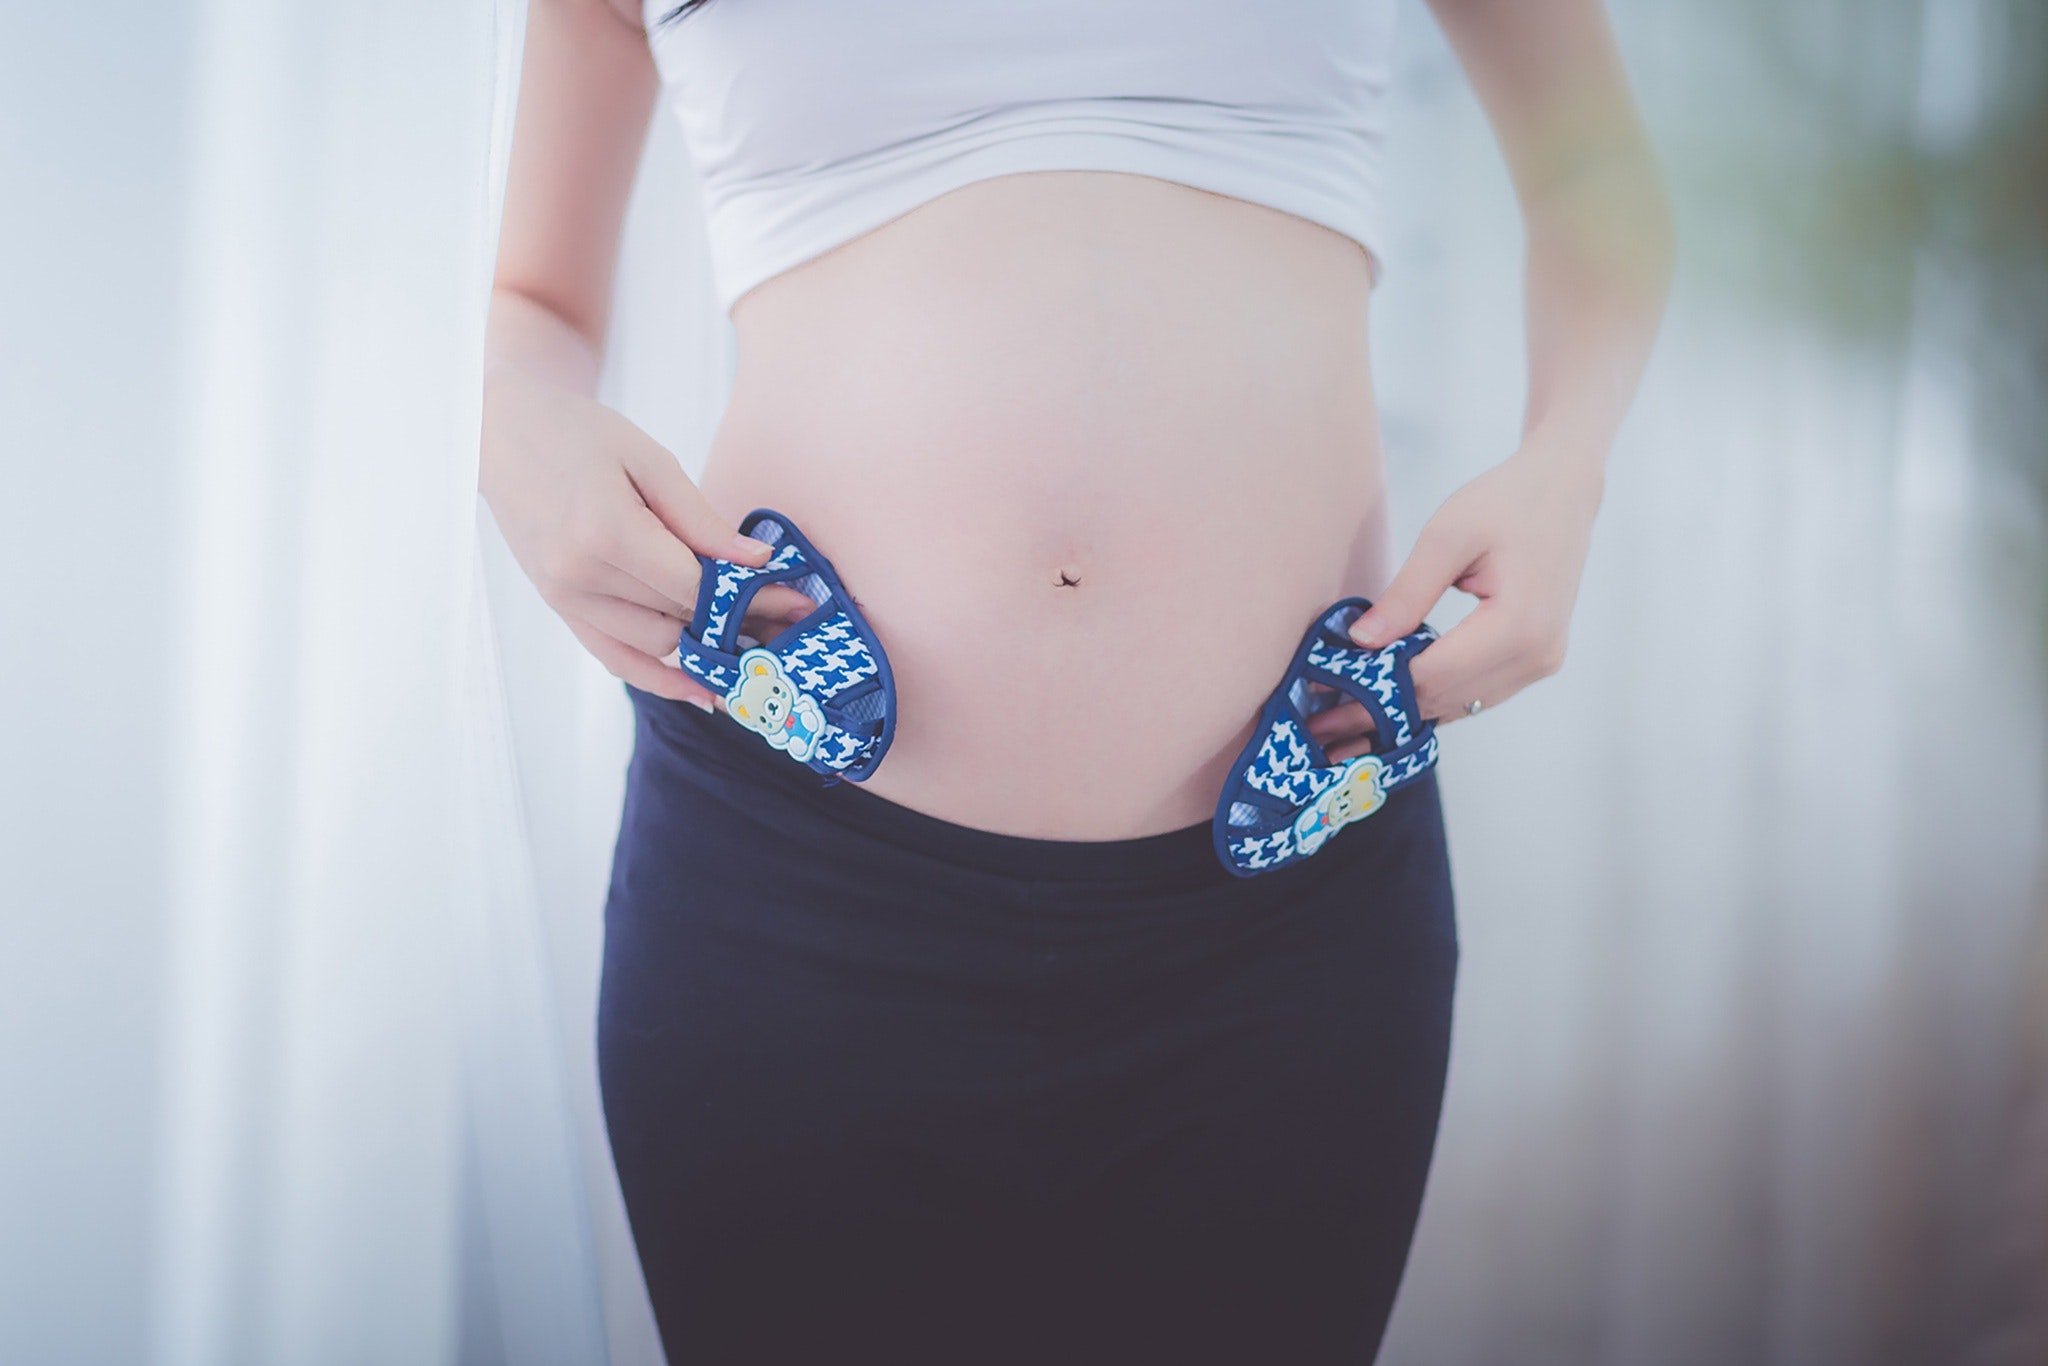 Pregnant woman holding baby shoes. | Source: Pexels